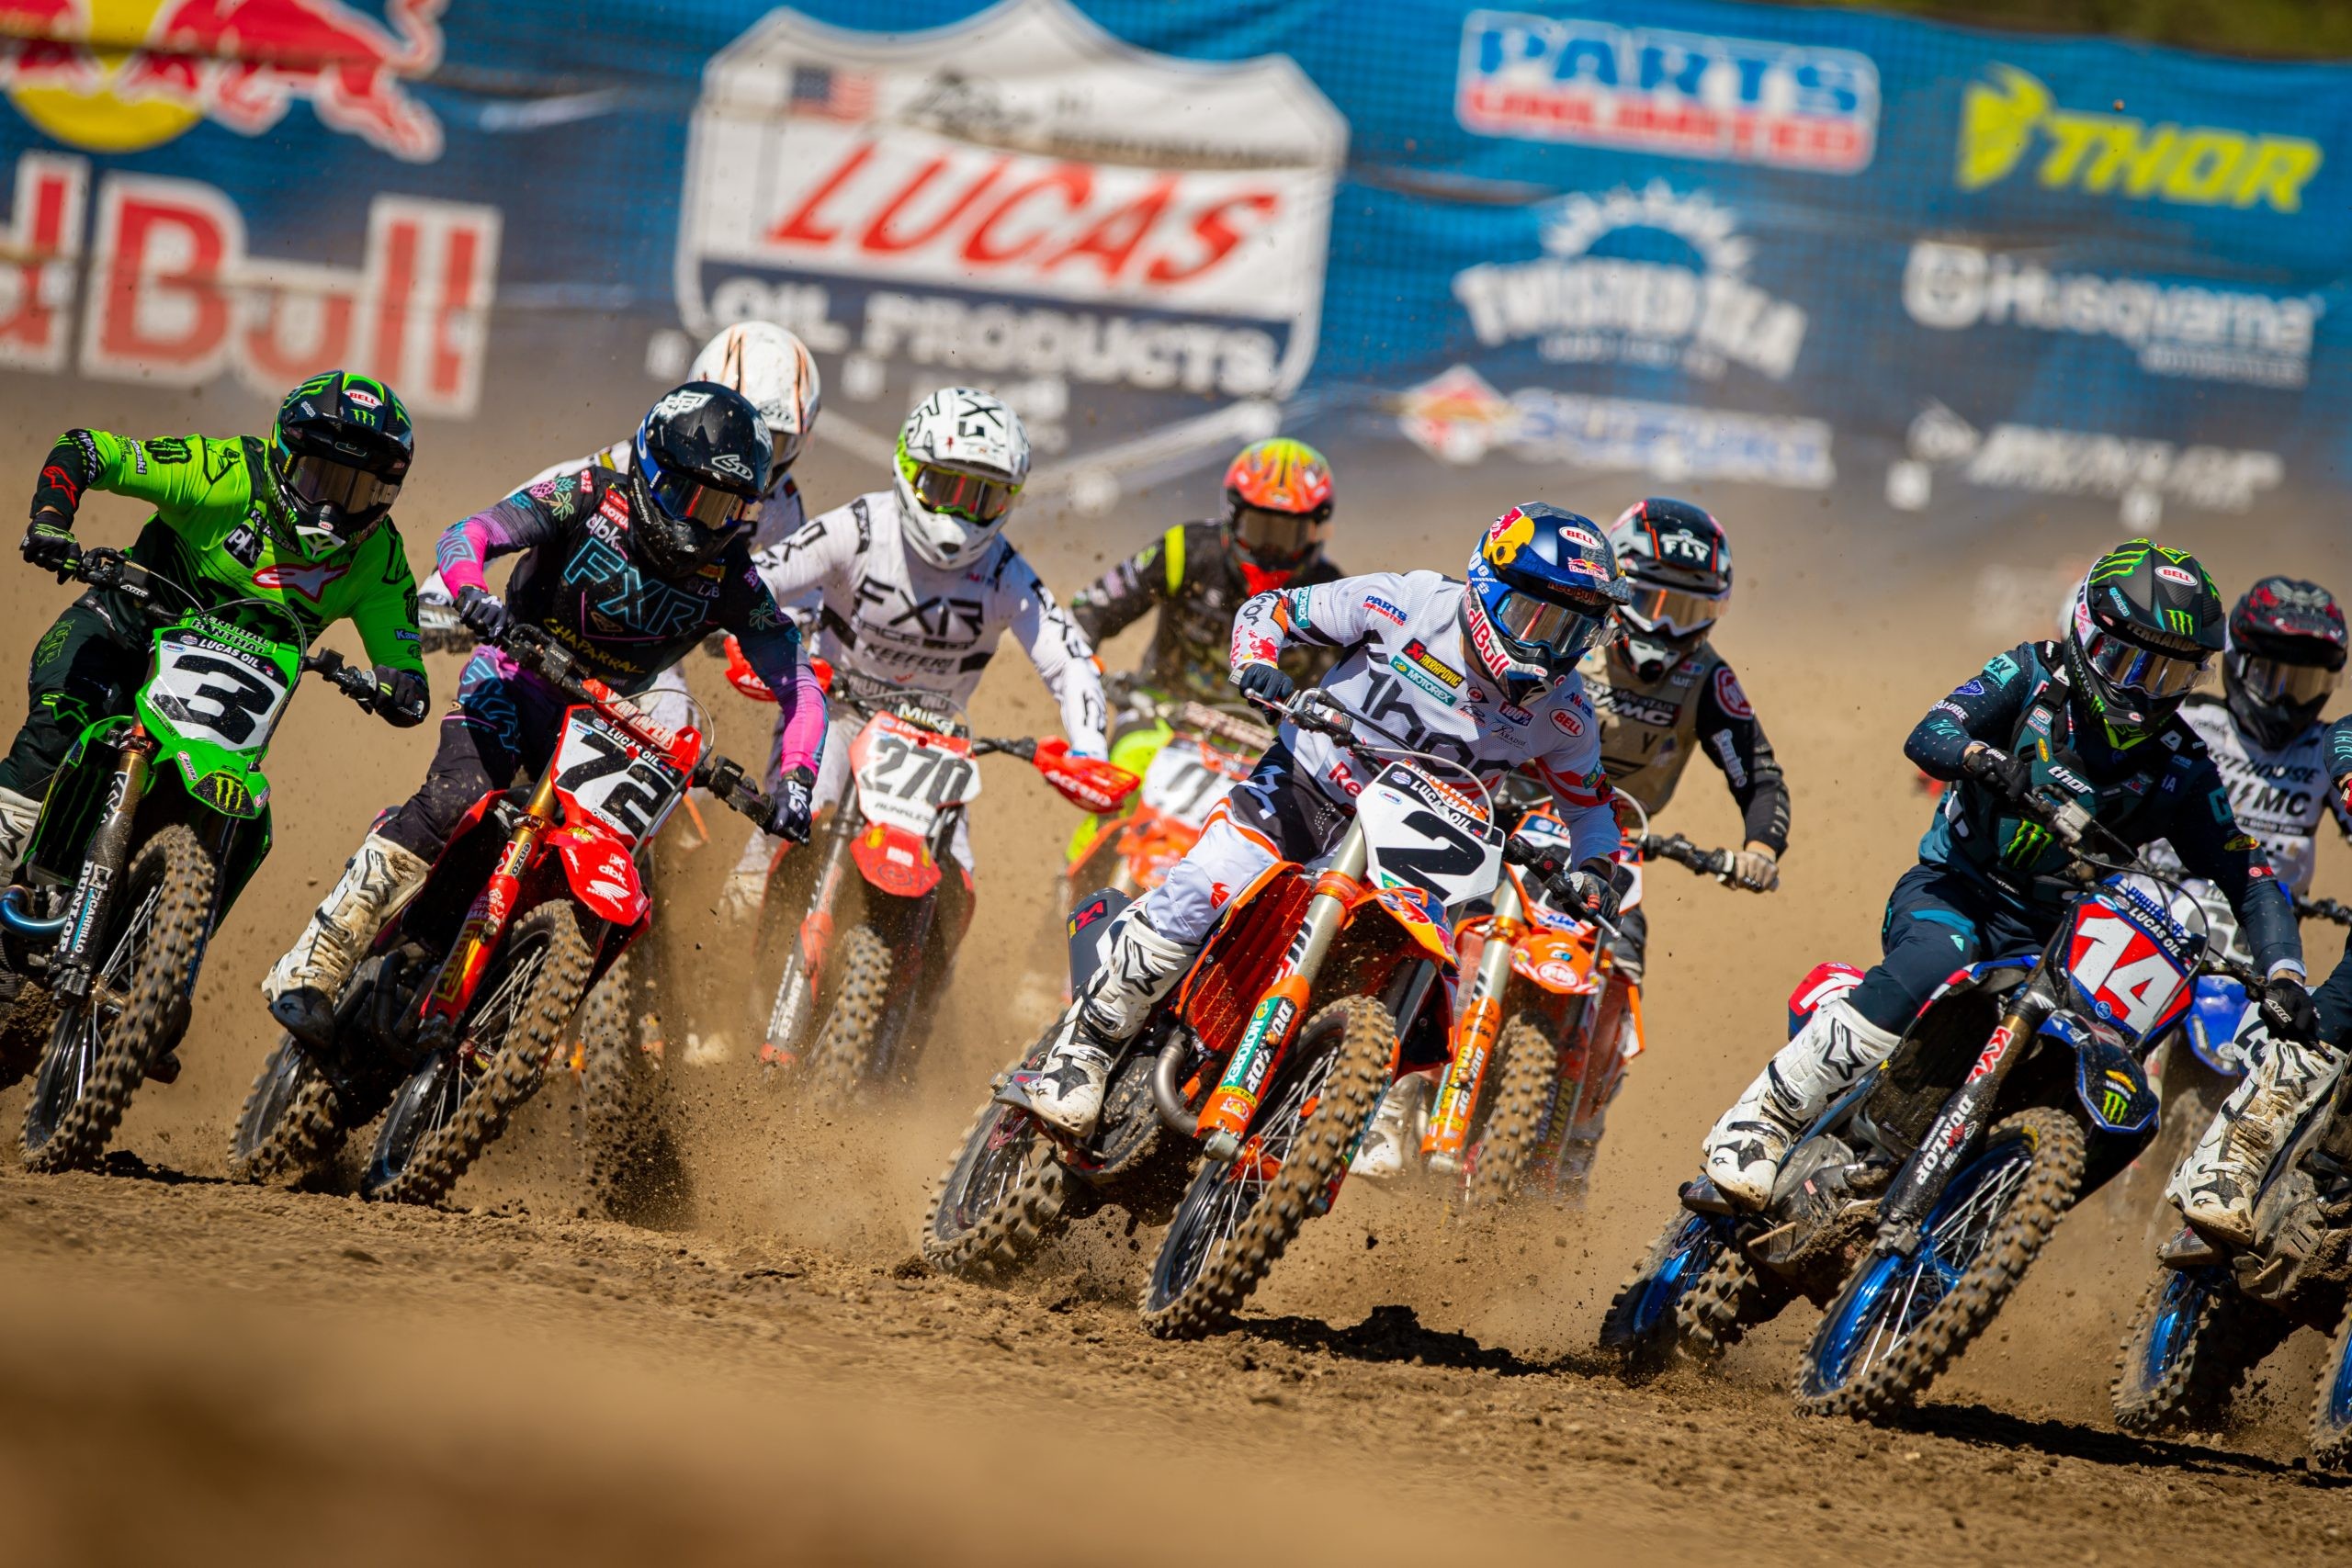 Big time motocross racing roars into town this week for annual Hangtown Classic